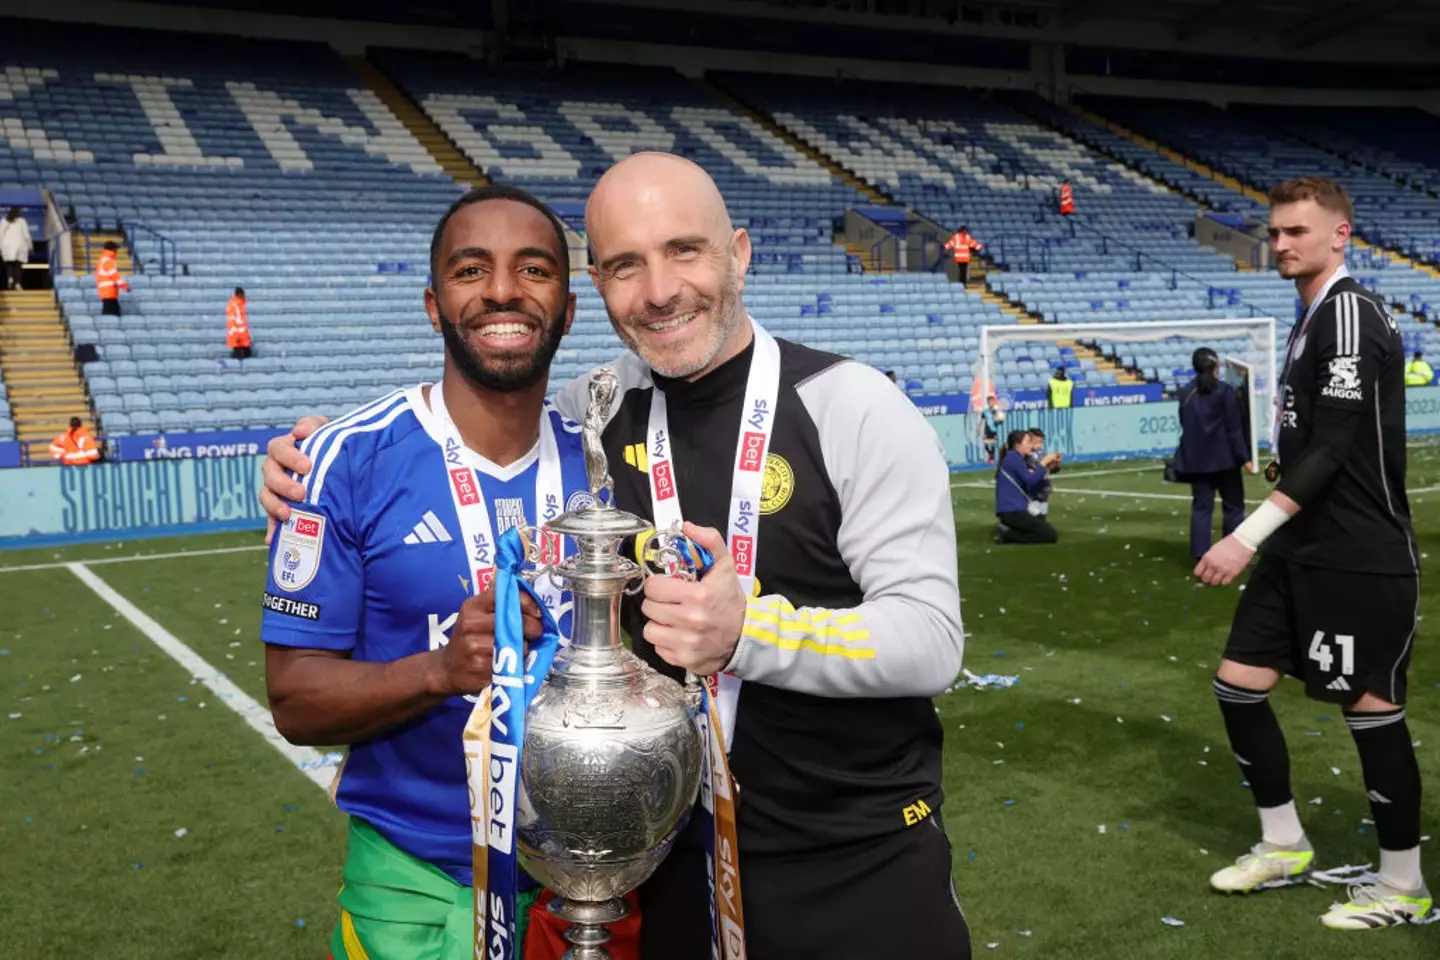 Leicester manager Enzo Maresca and Ricardo Pereira celebrate after winning the Championship title (